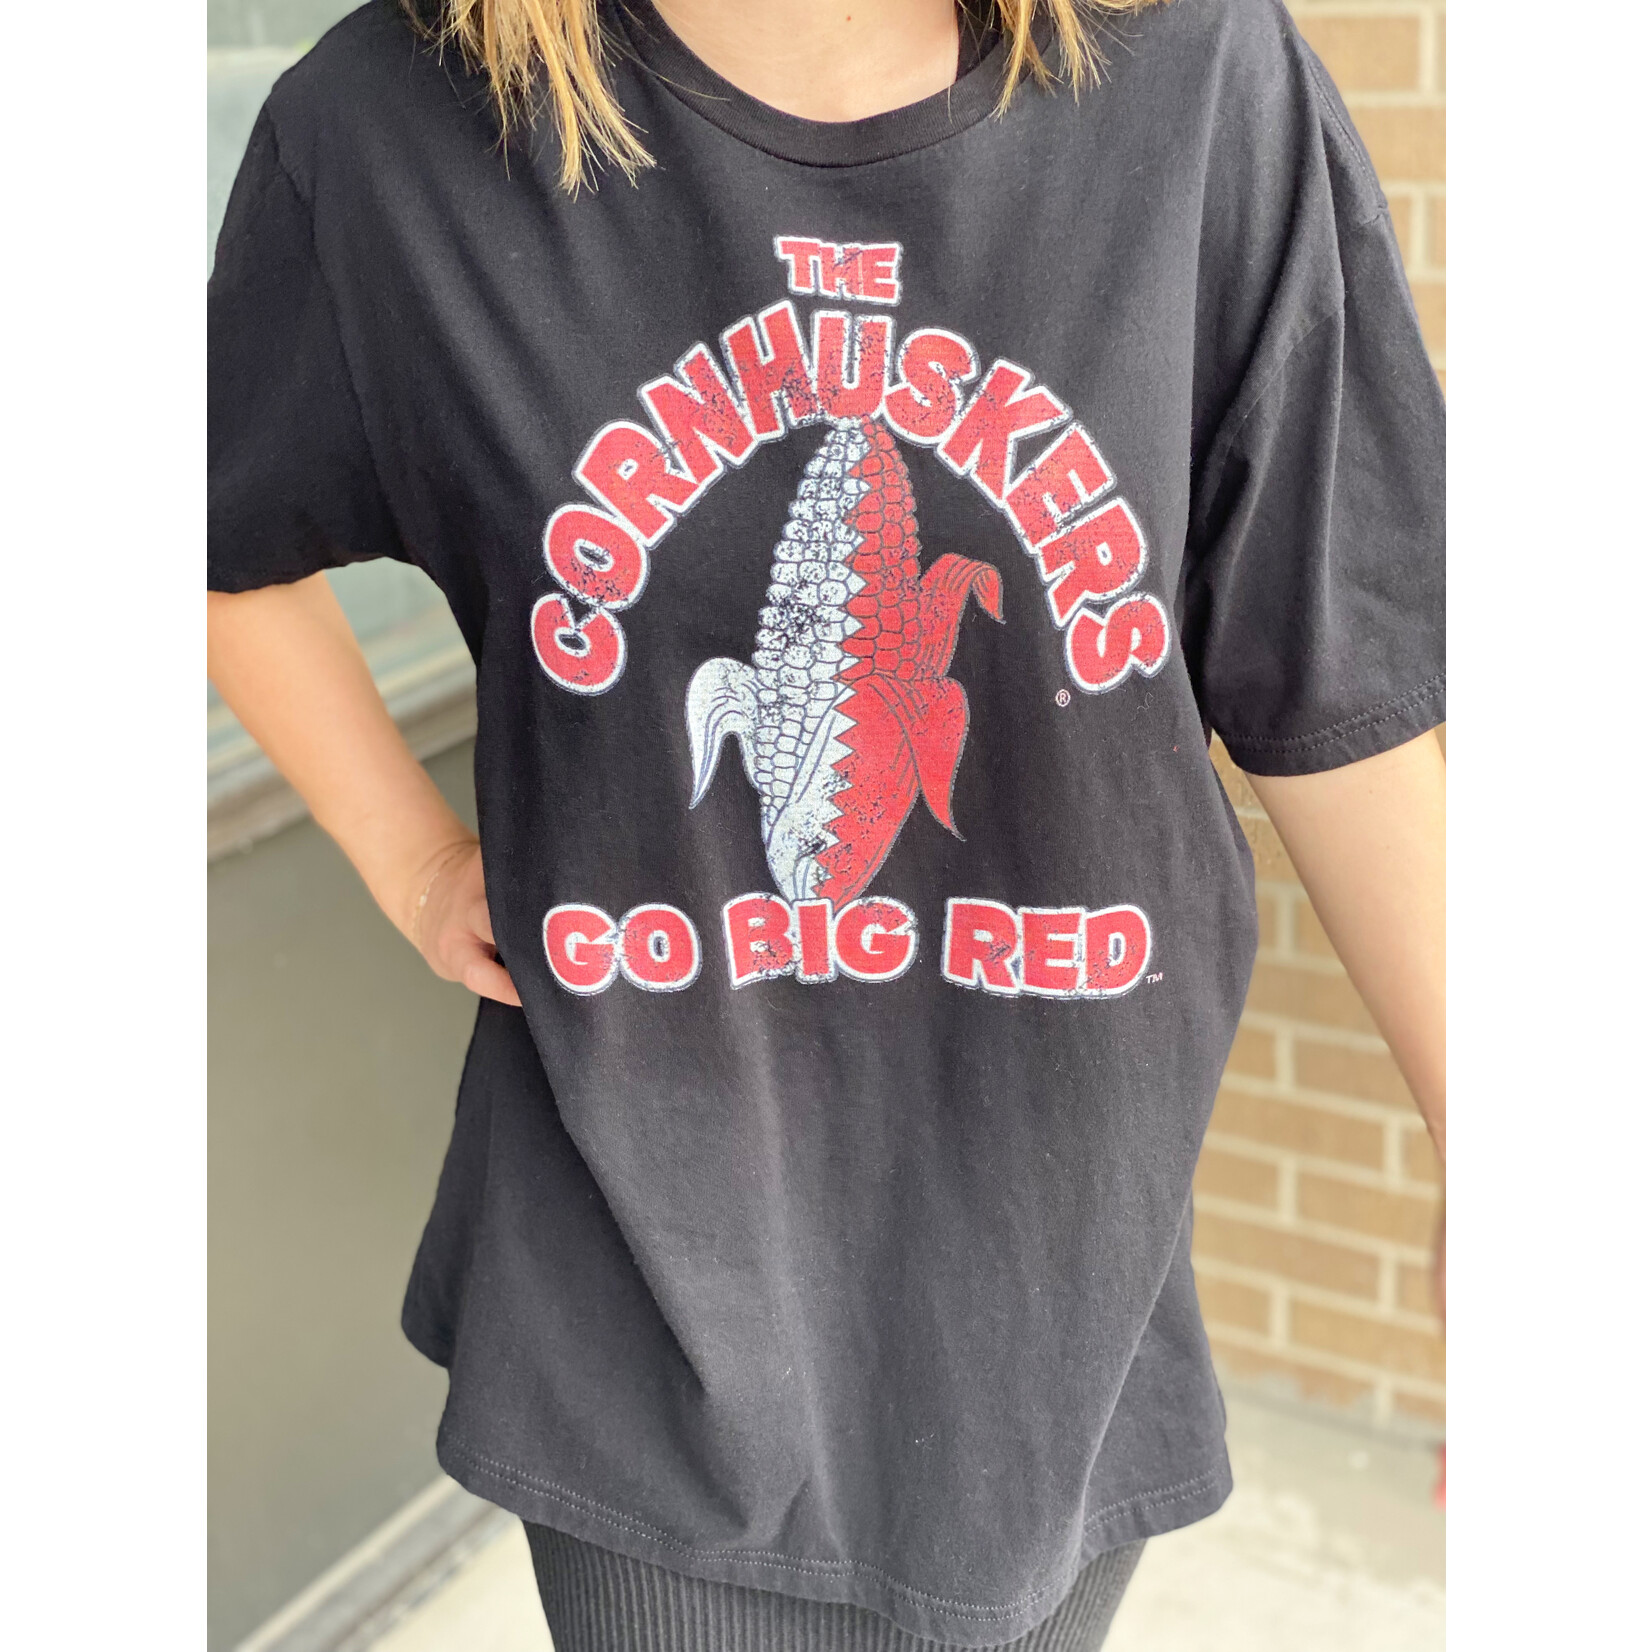 The Cornhuskers Go Big Red Shirt